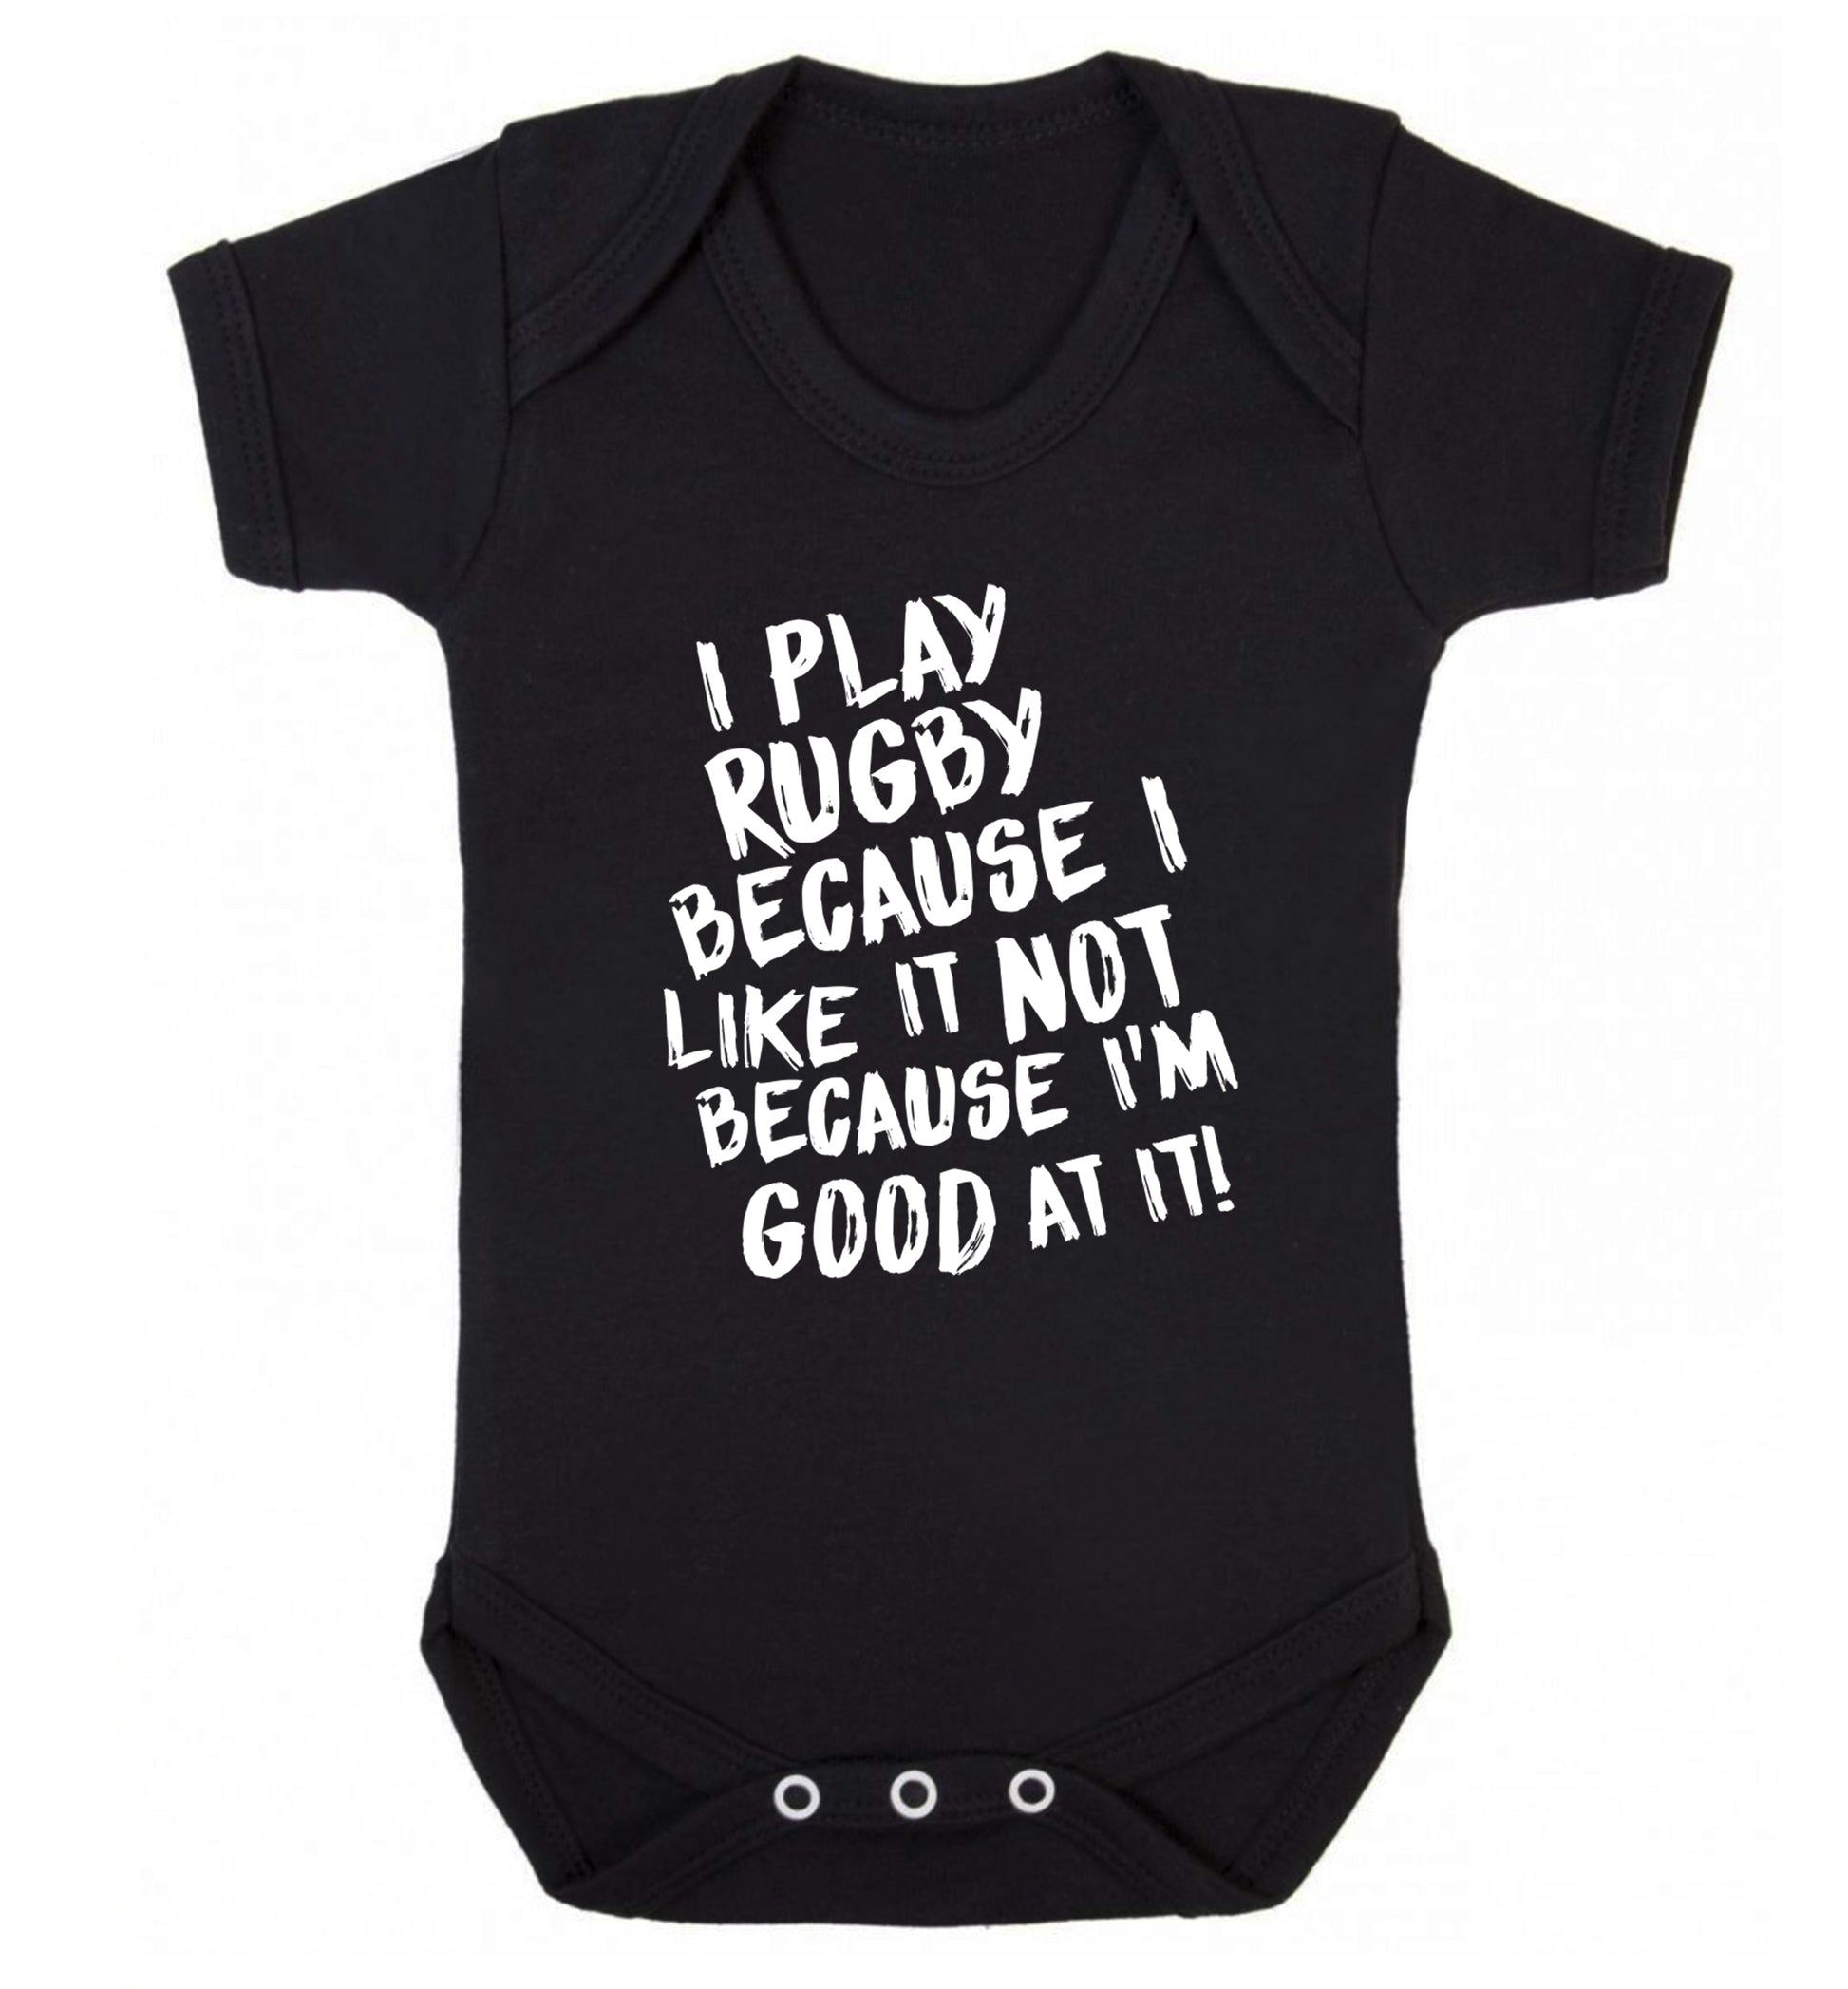 I play rugby because I like it not because I'm good at it Baby Vest black 18-24 months